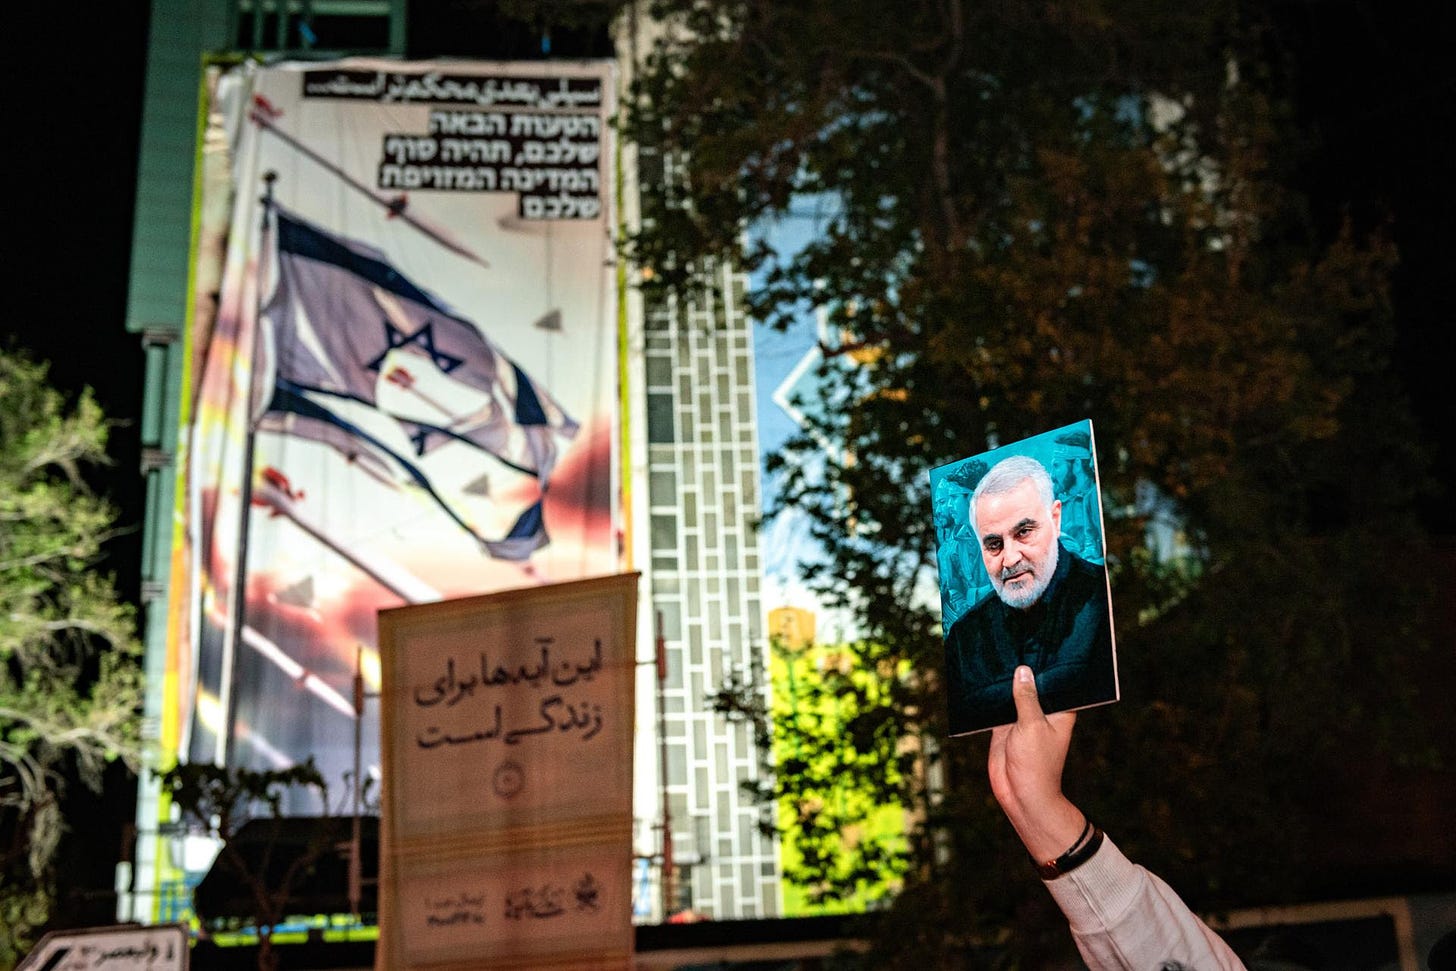 An Iranian pro-government supporter holds up a picture of slain Gen. Qassem Soleimani at Palestine Square in Tehran, on April 14, 2024 in front of an anti-Israel sign